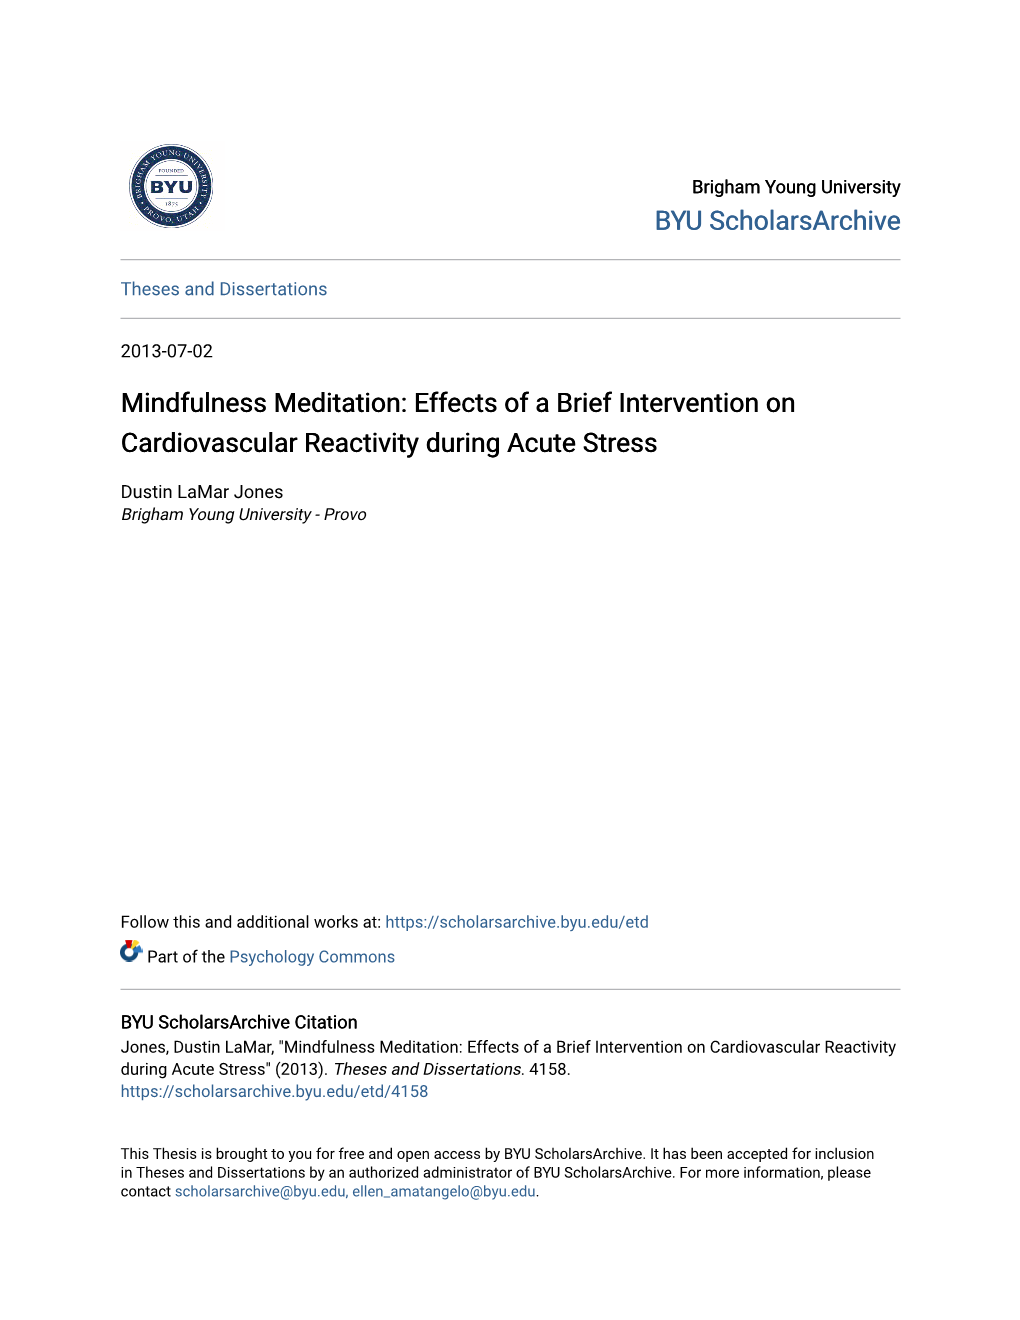 Mindfulness Meditation: Effects of a Brief Intervention on Cardiovascular Reactivity During Acute Stress